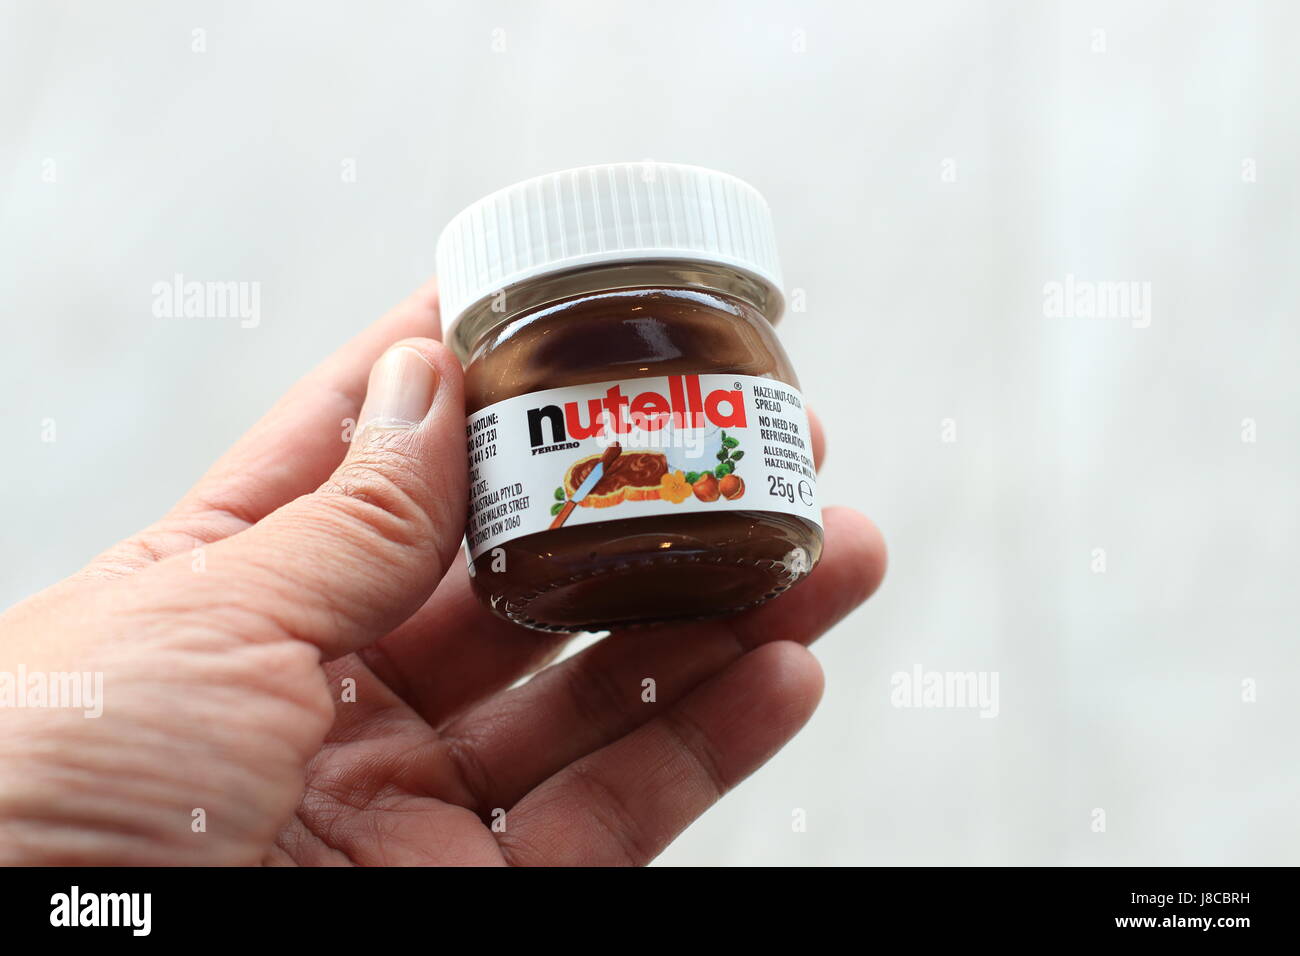 Chocolate spread jar isolated Cut Out Stock Images & Pictures - Alamy